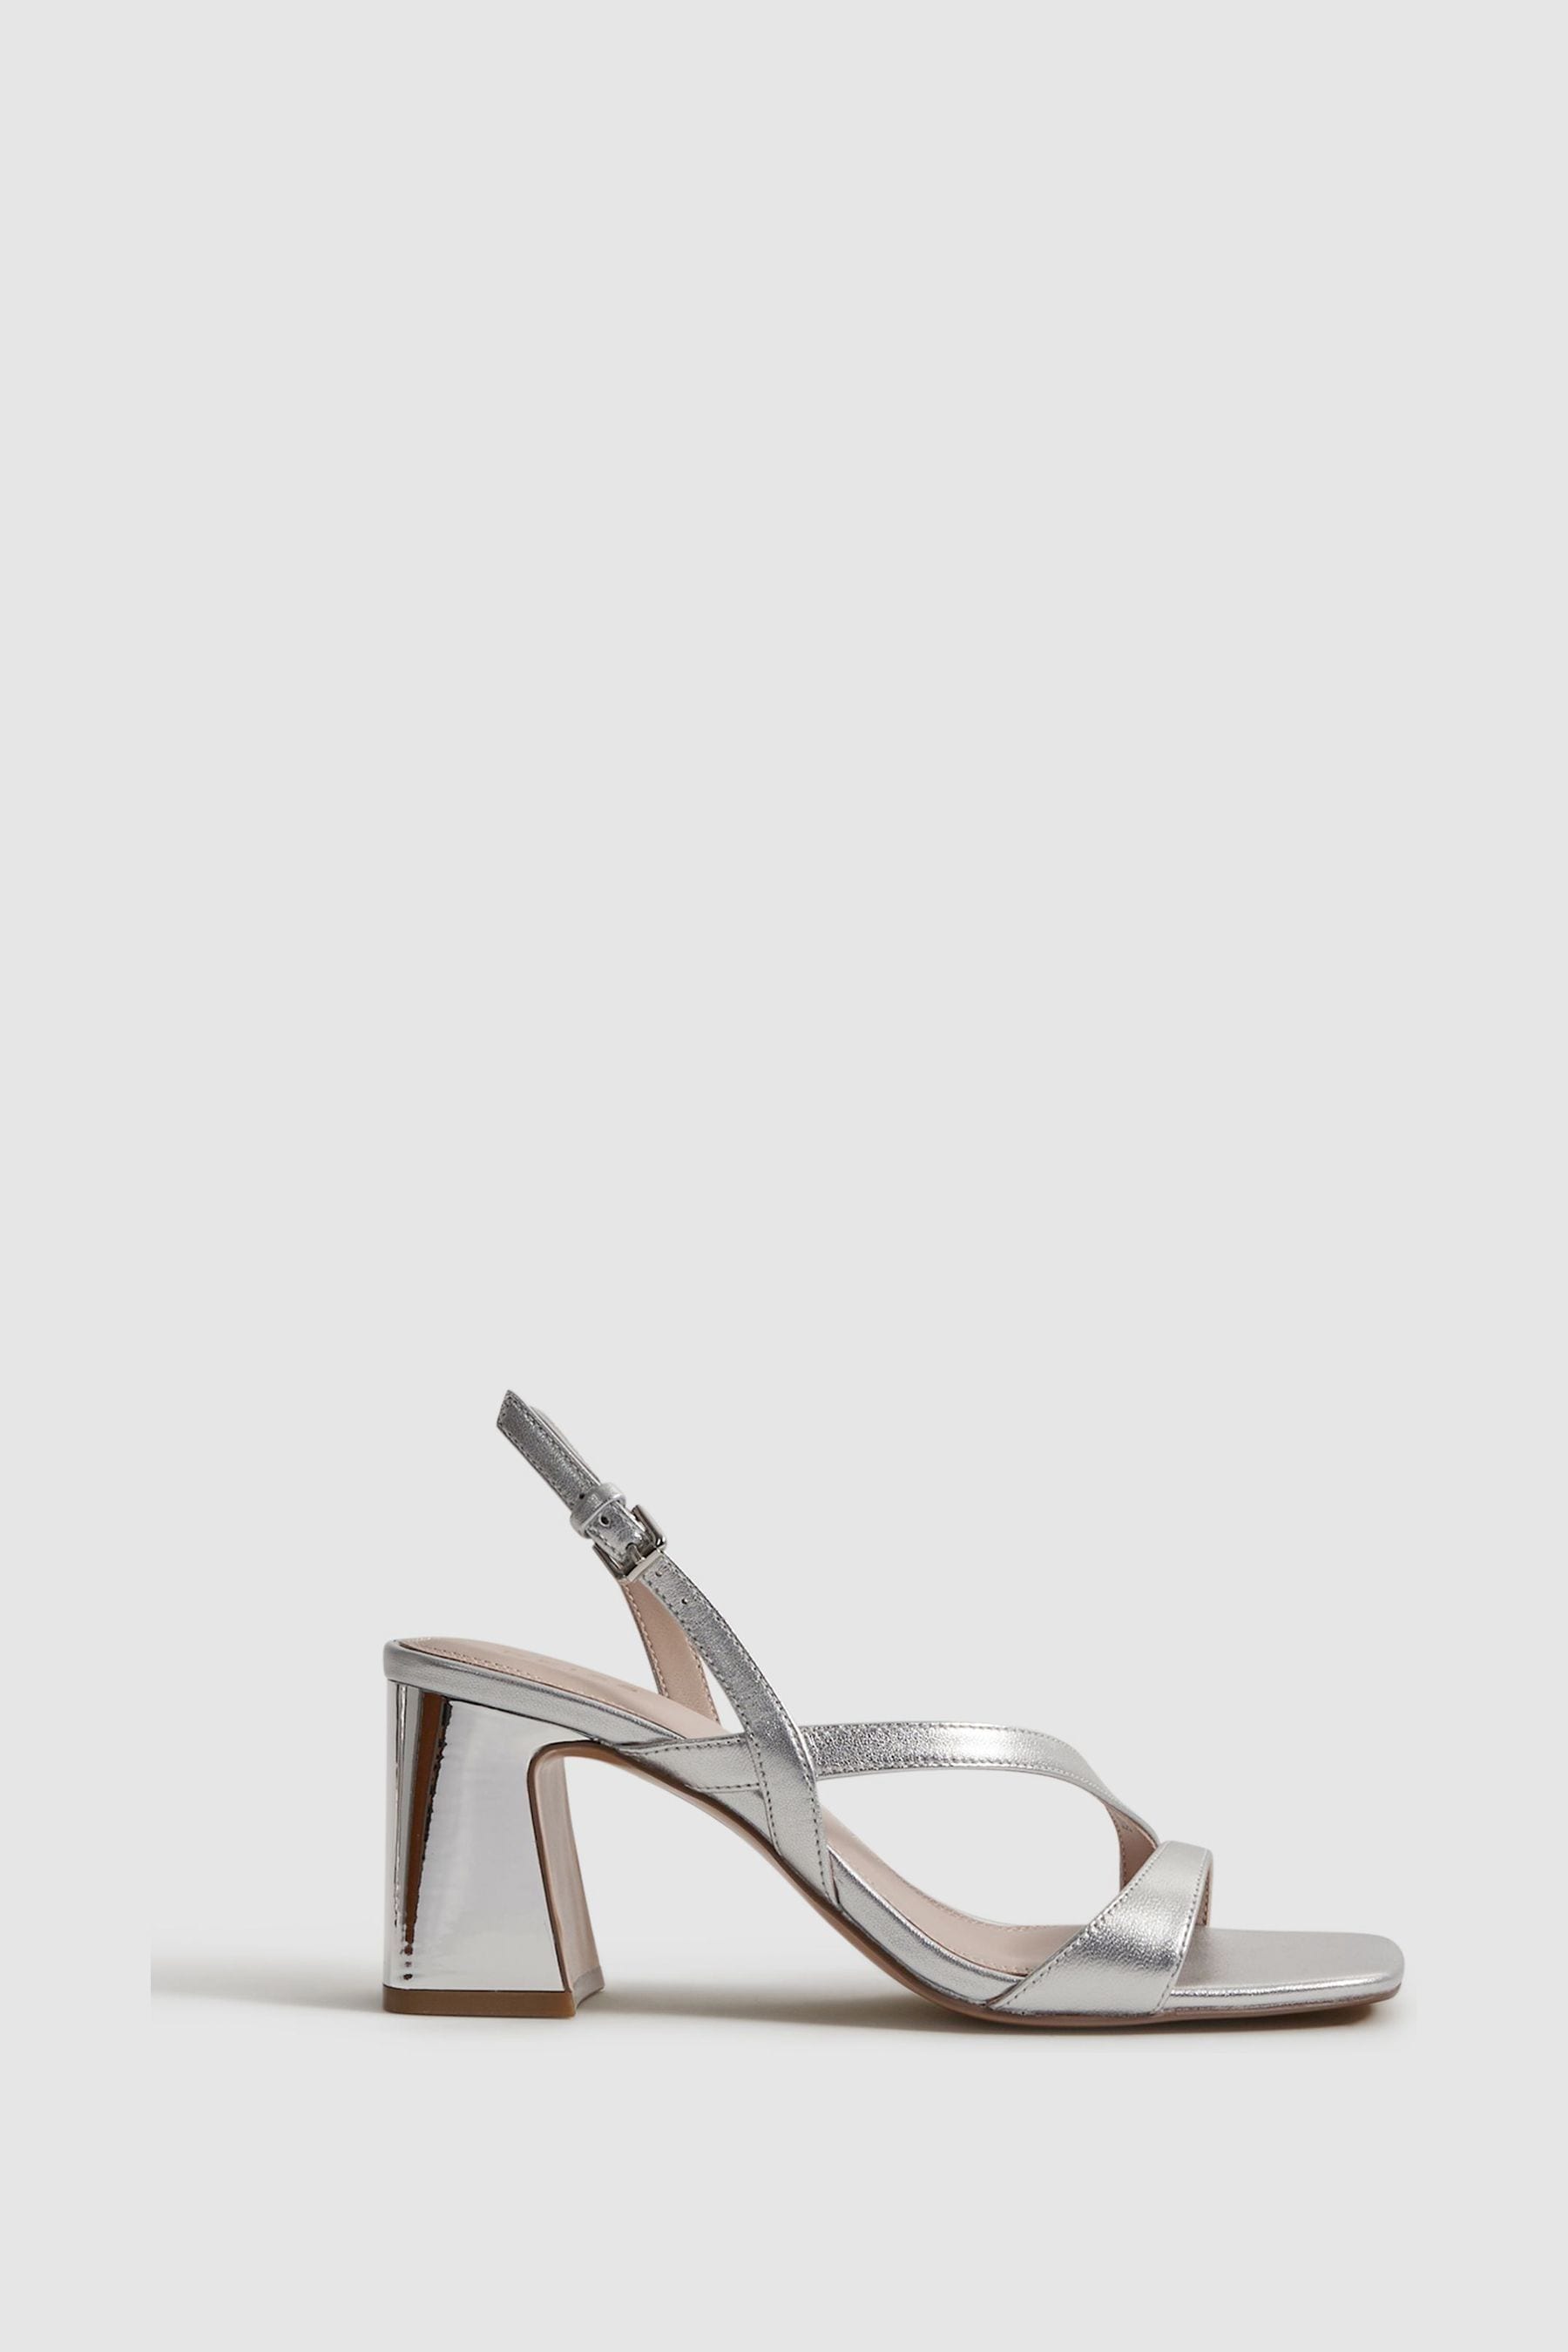 Reiss Alice - Silver Strappy Leather Heeled Sandals, Us 9